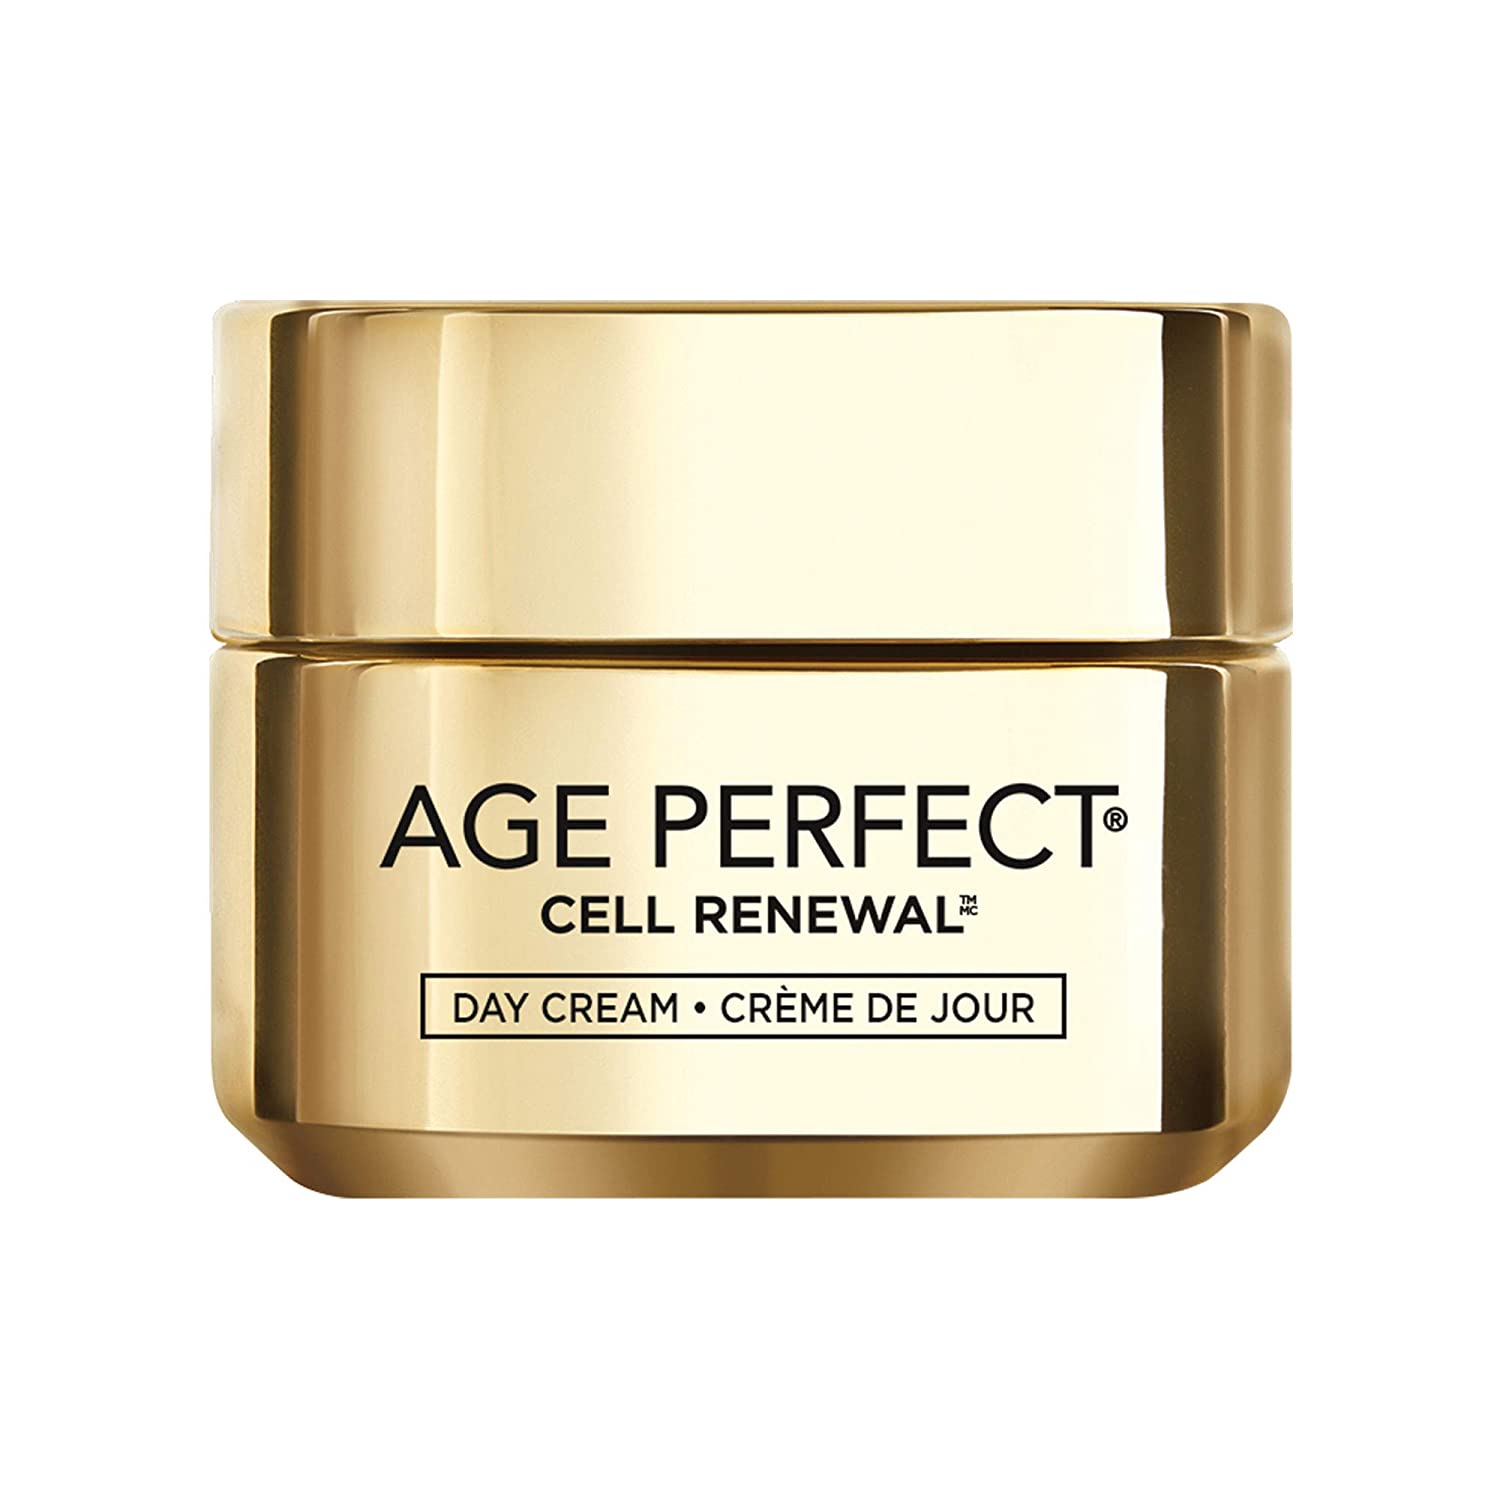 1.7-Oz L'Oreal Paris Age Perfect Cell Renewal Skin Renewing Day Cream $6.65 w/ S&S + Free Shipping w/ Amazon Prime or Orders $25+